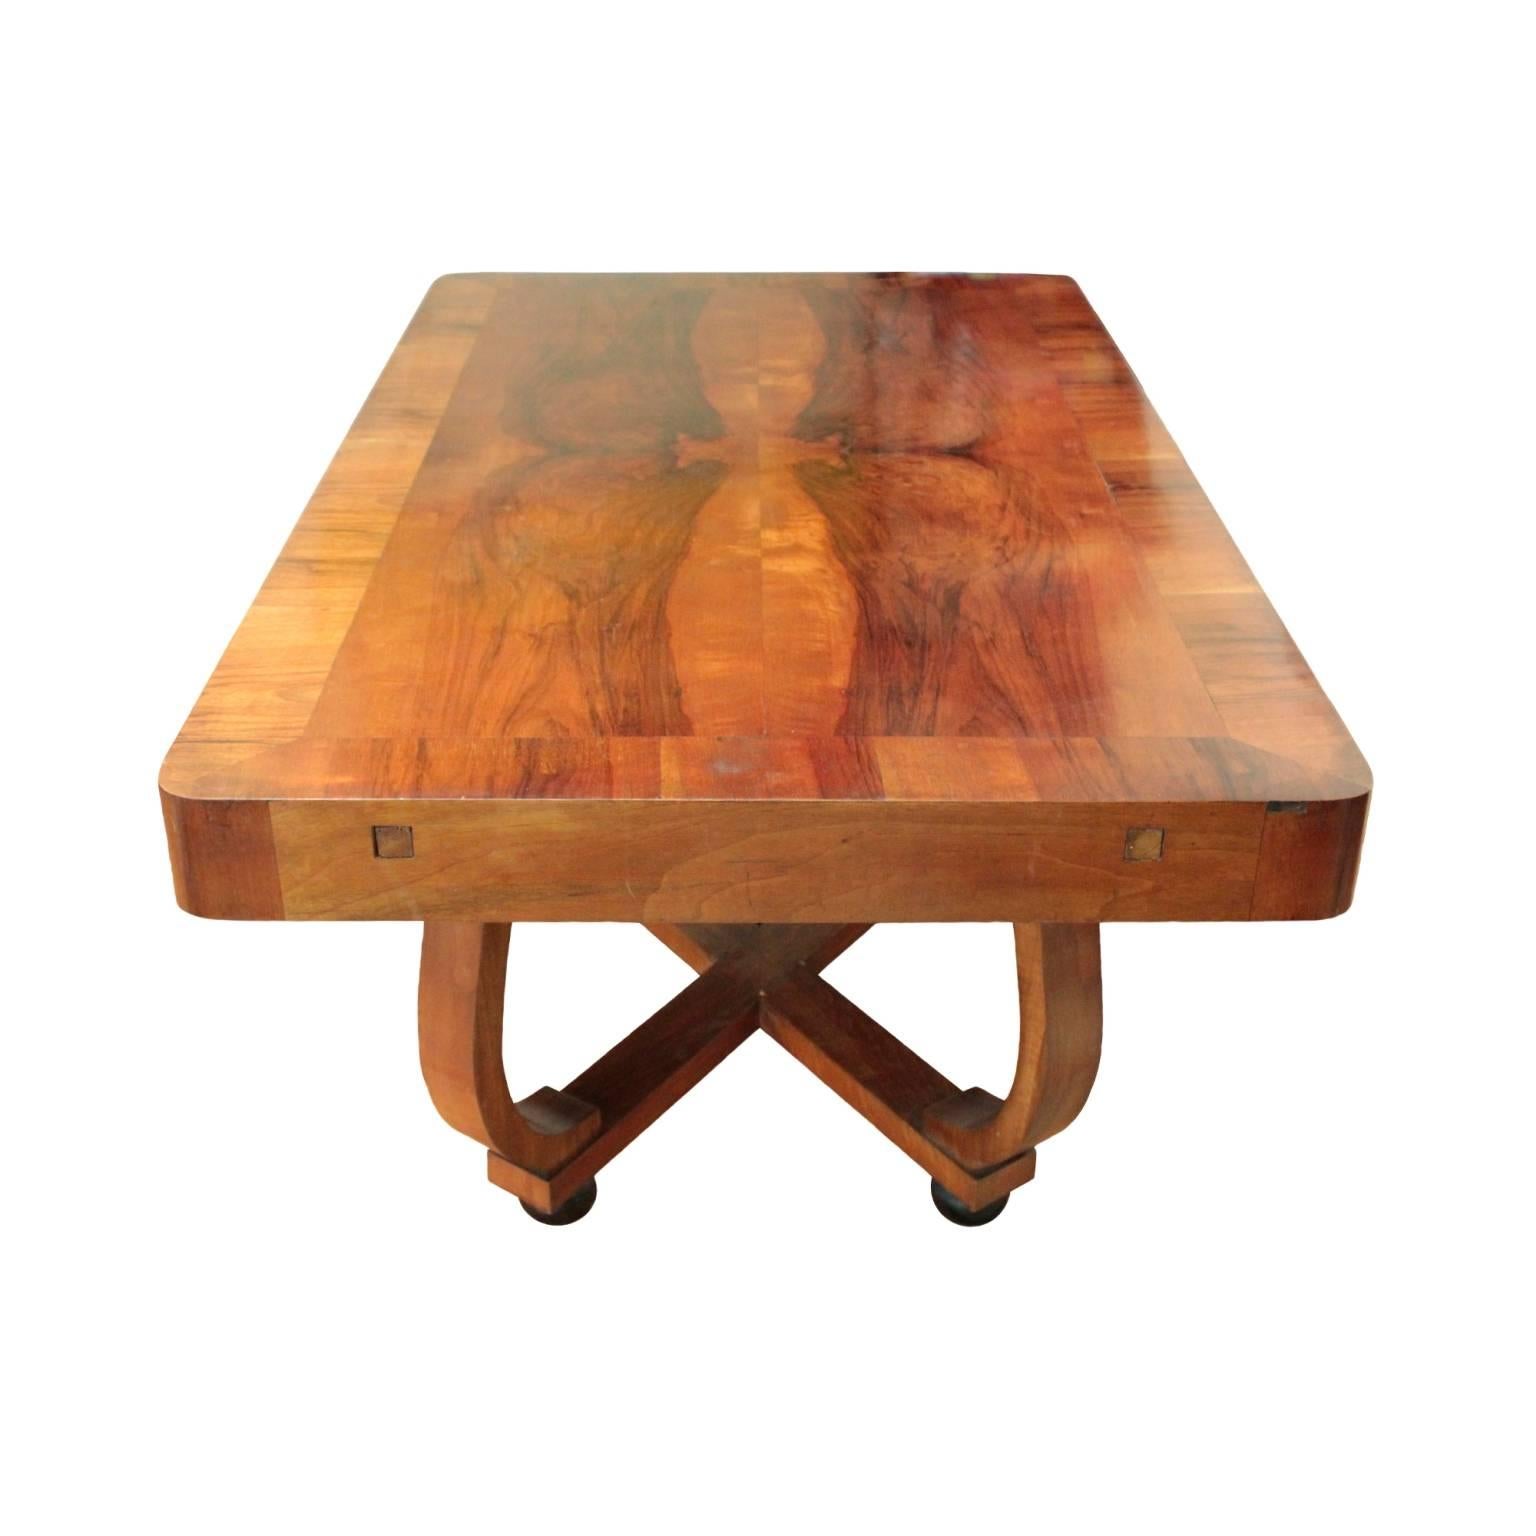 French Art Deco Period Rectangular Dining Table In Good Condition For Sale In Hudson, NY